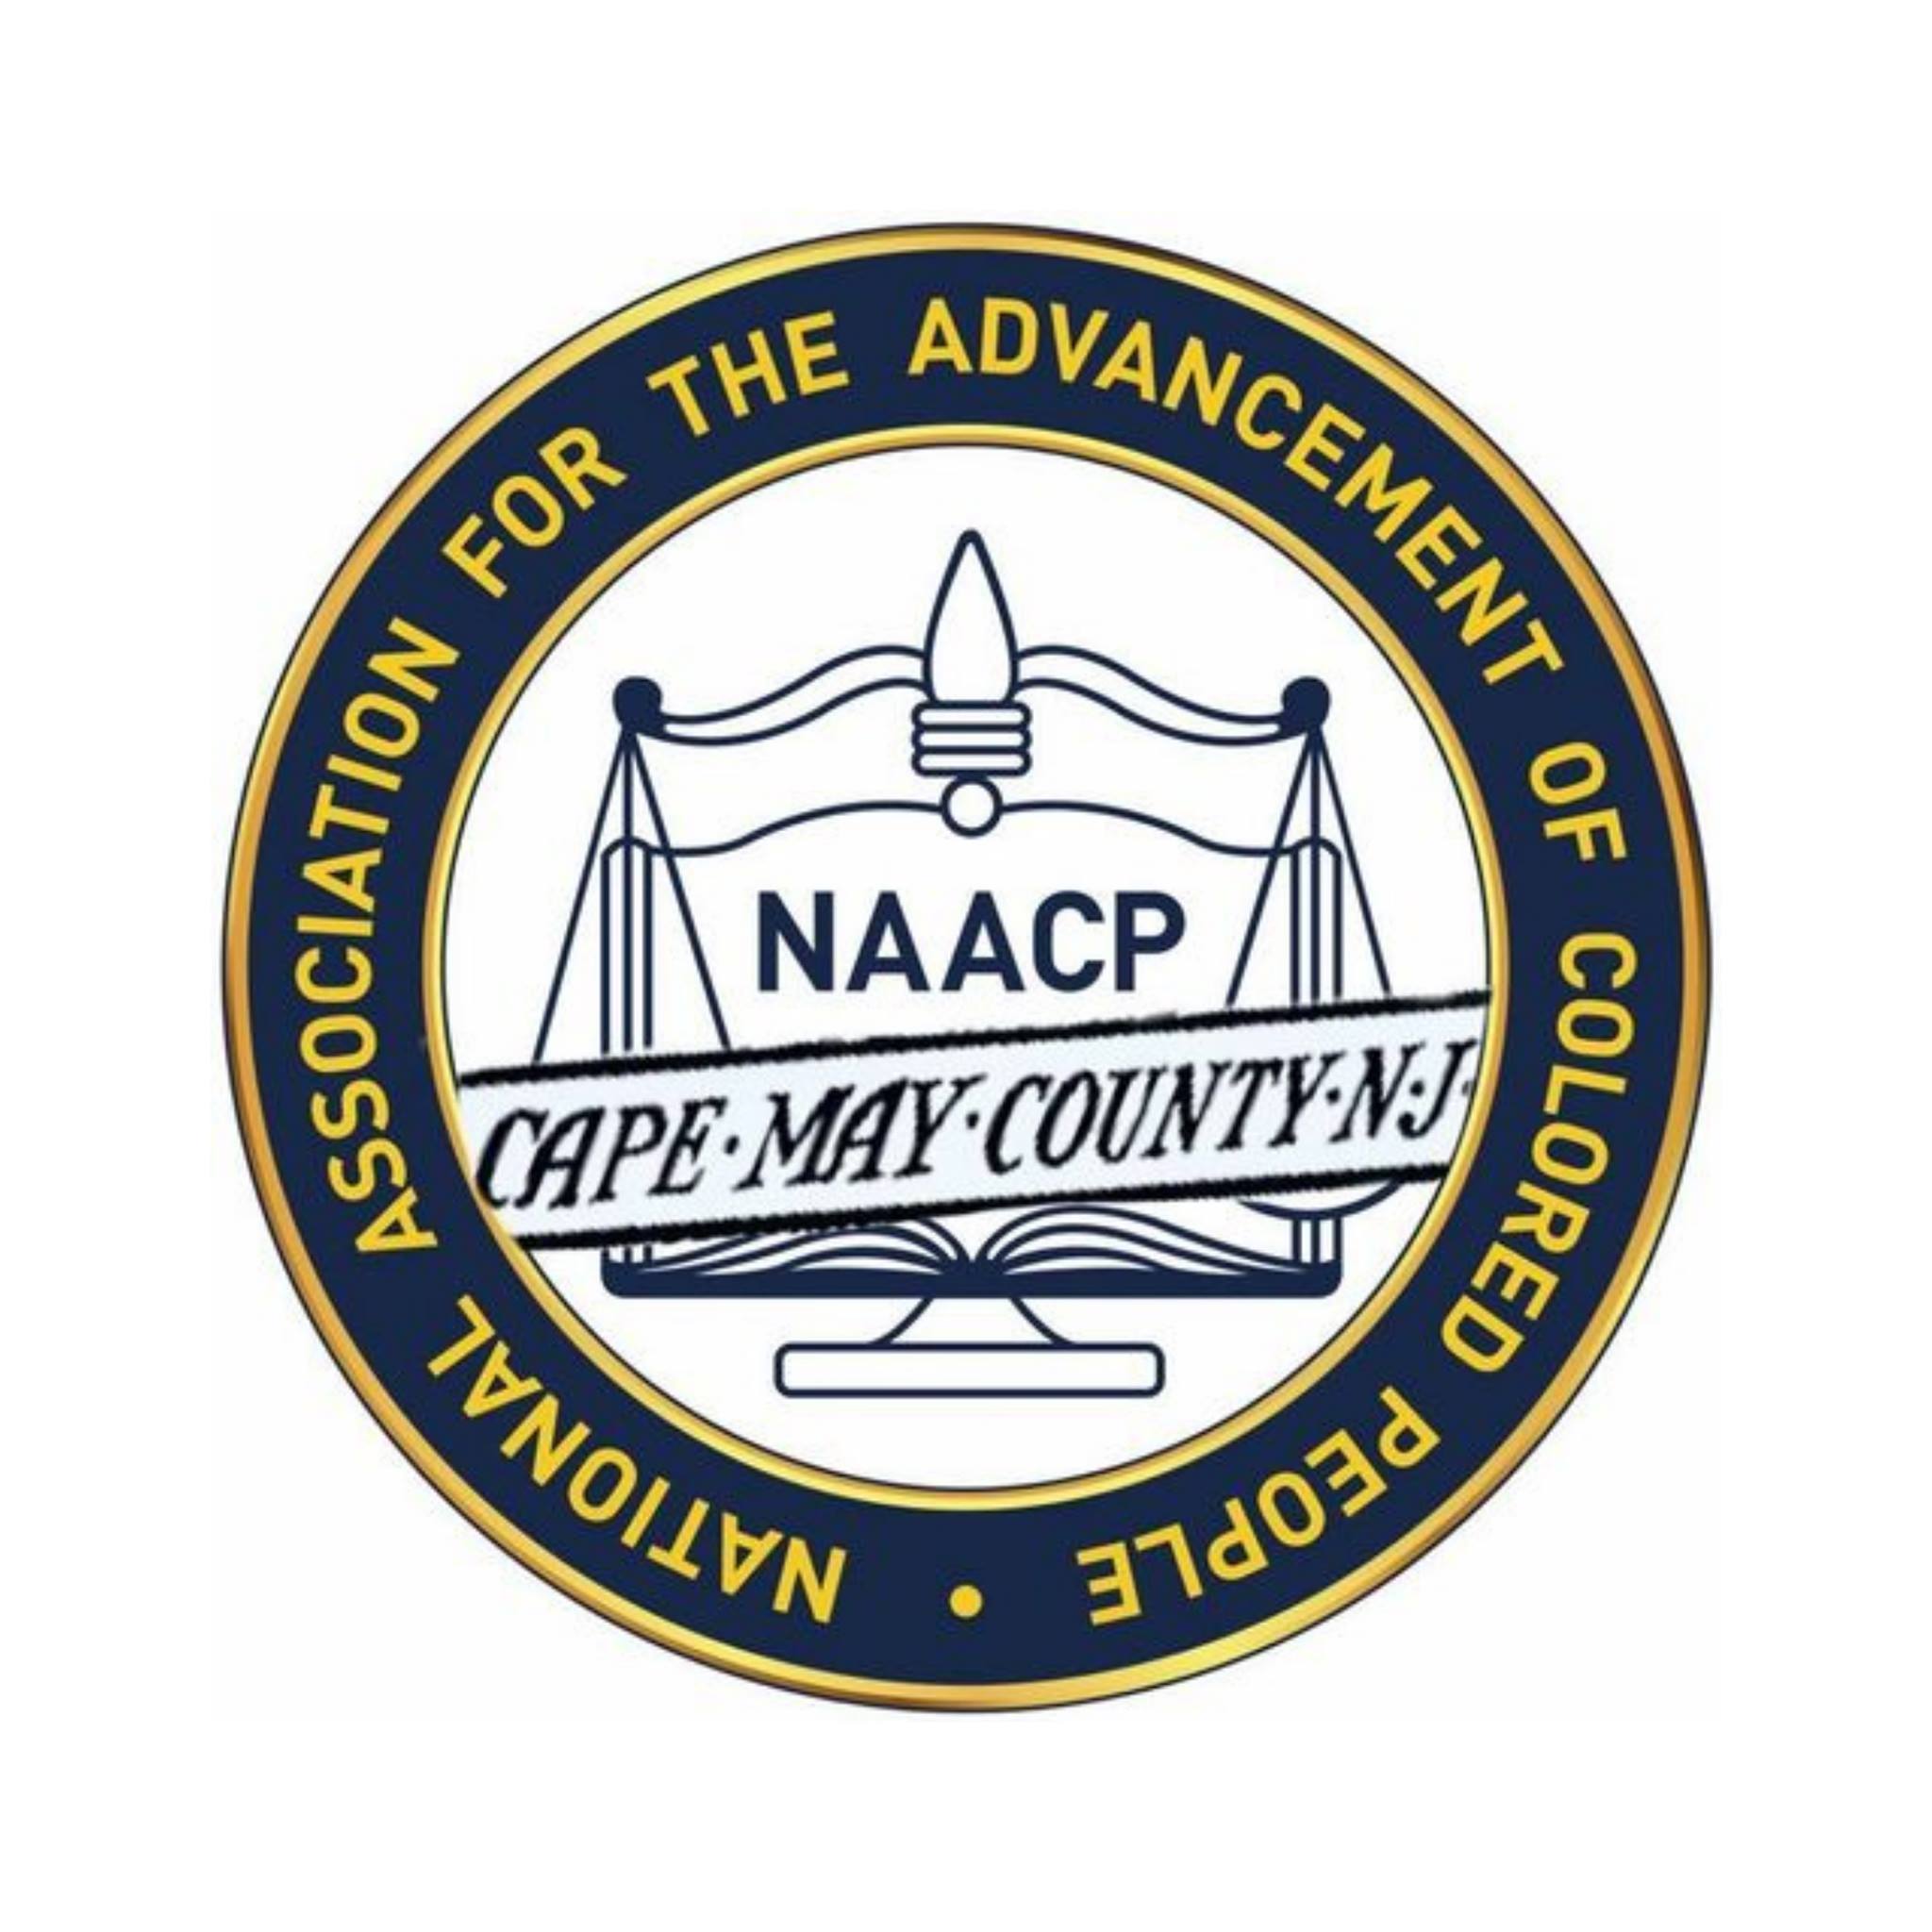 NAACP Cape May County Annual Freedom Fund Gala